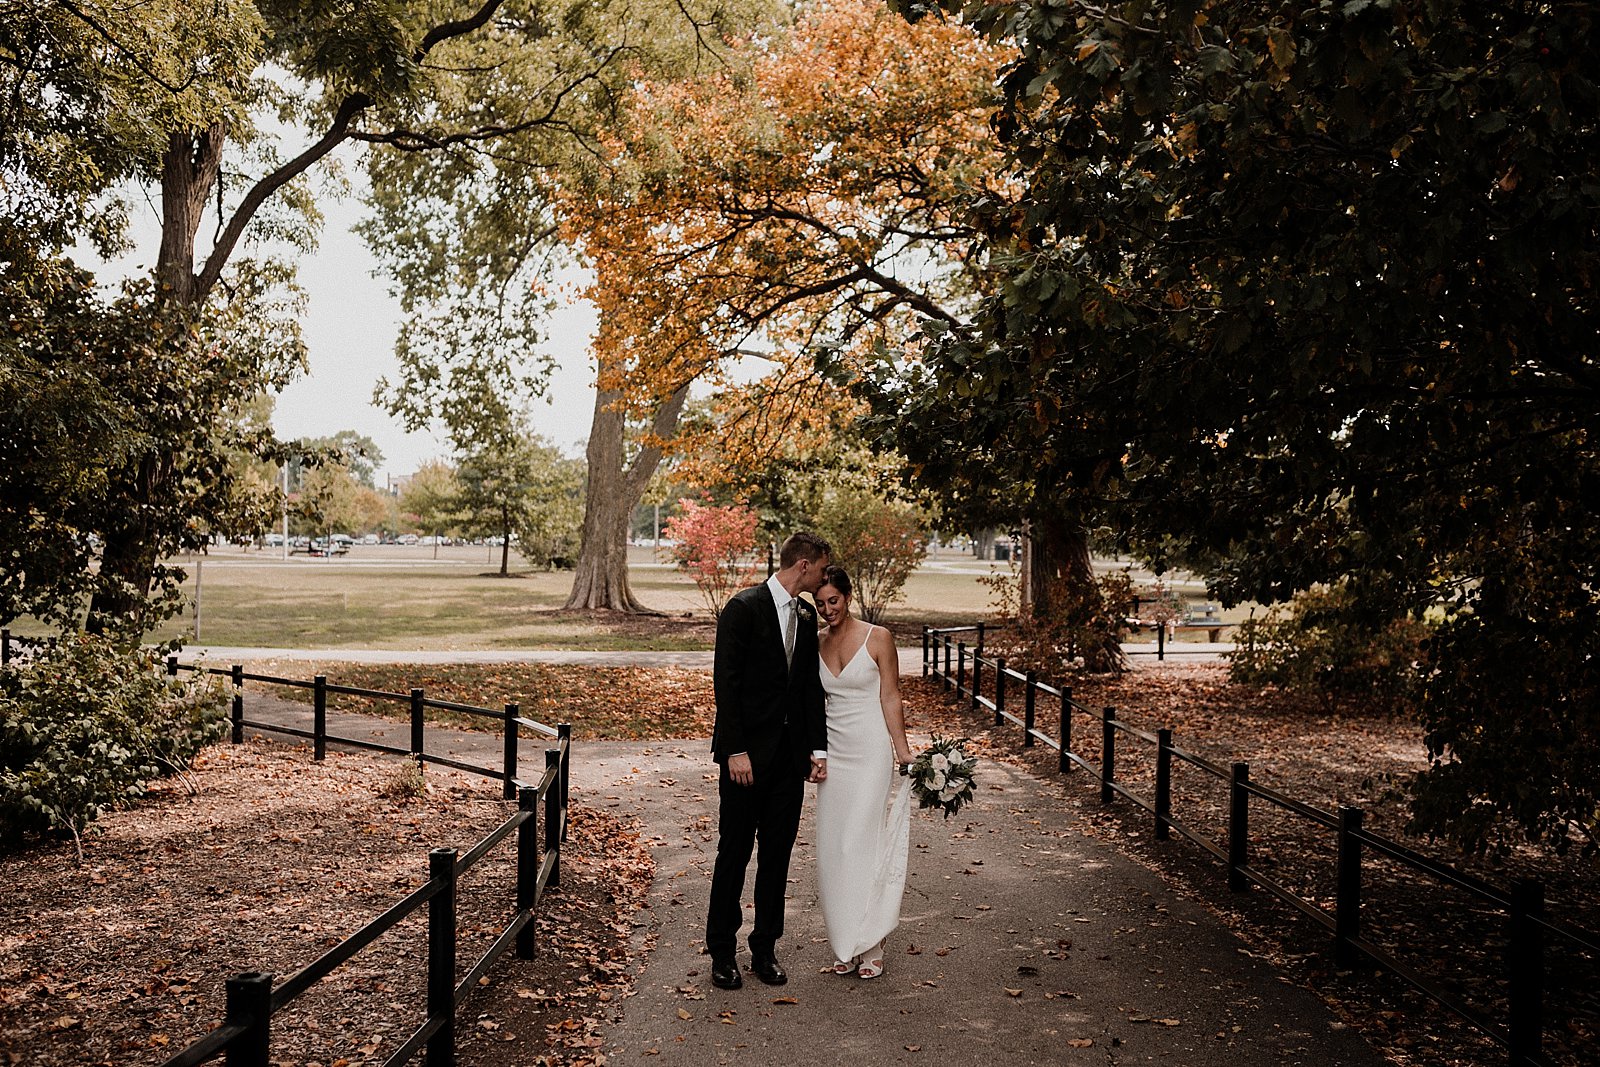 wes + gus | Wyn Wiley Photography_1339